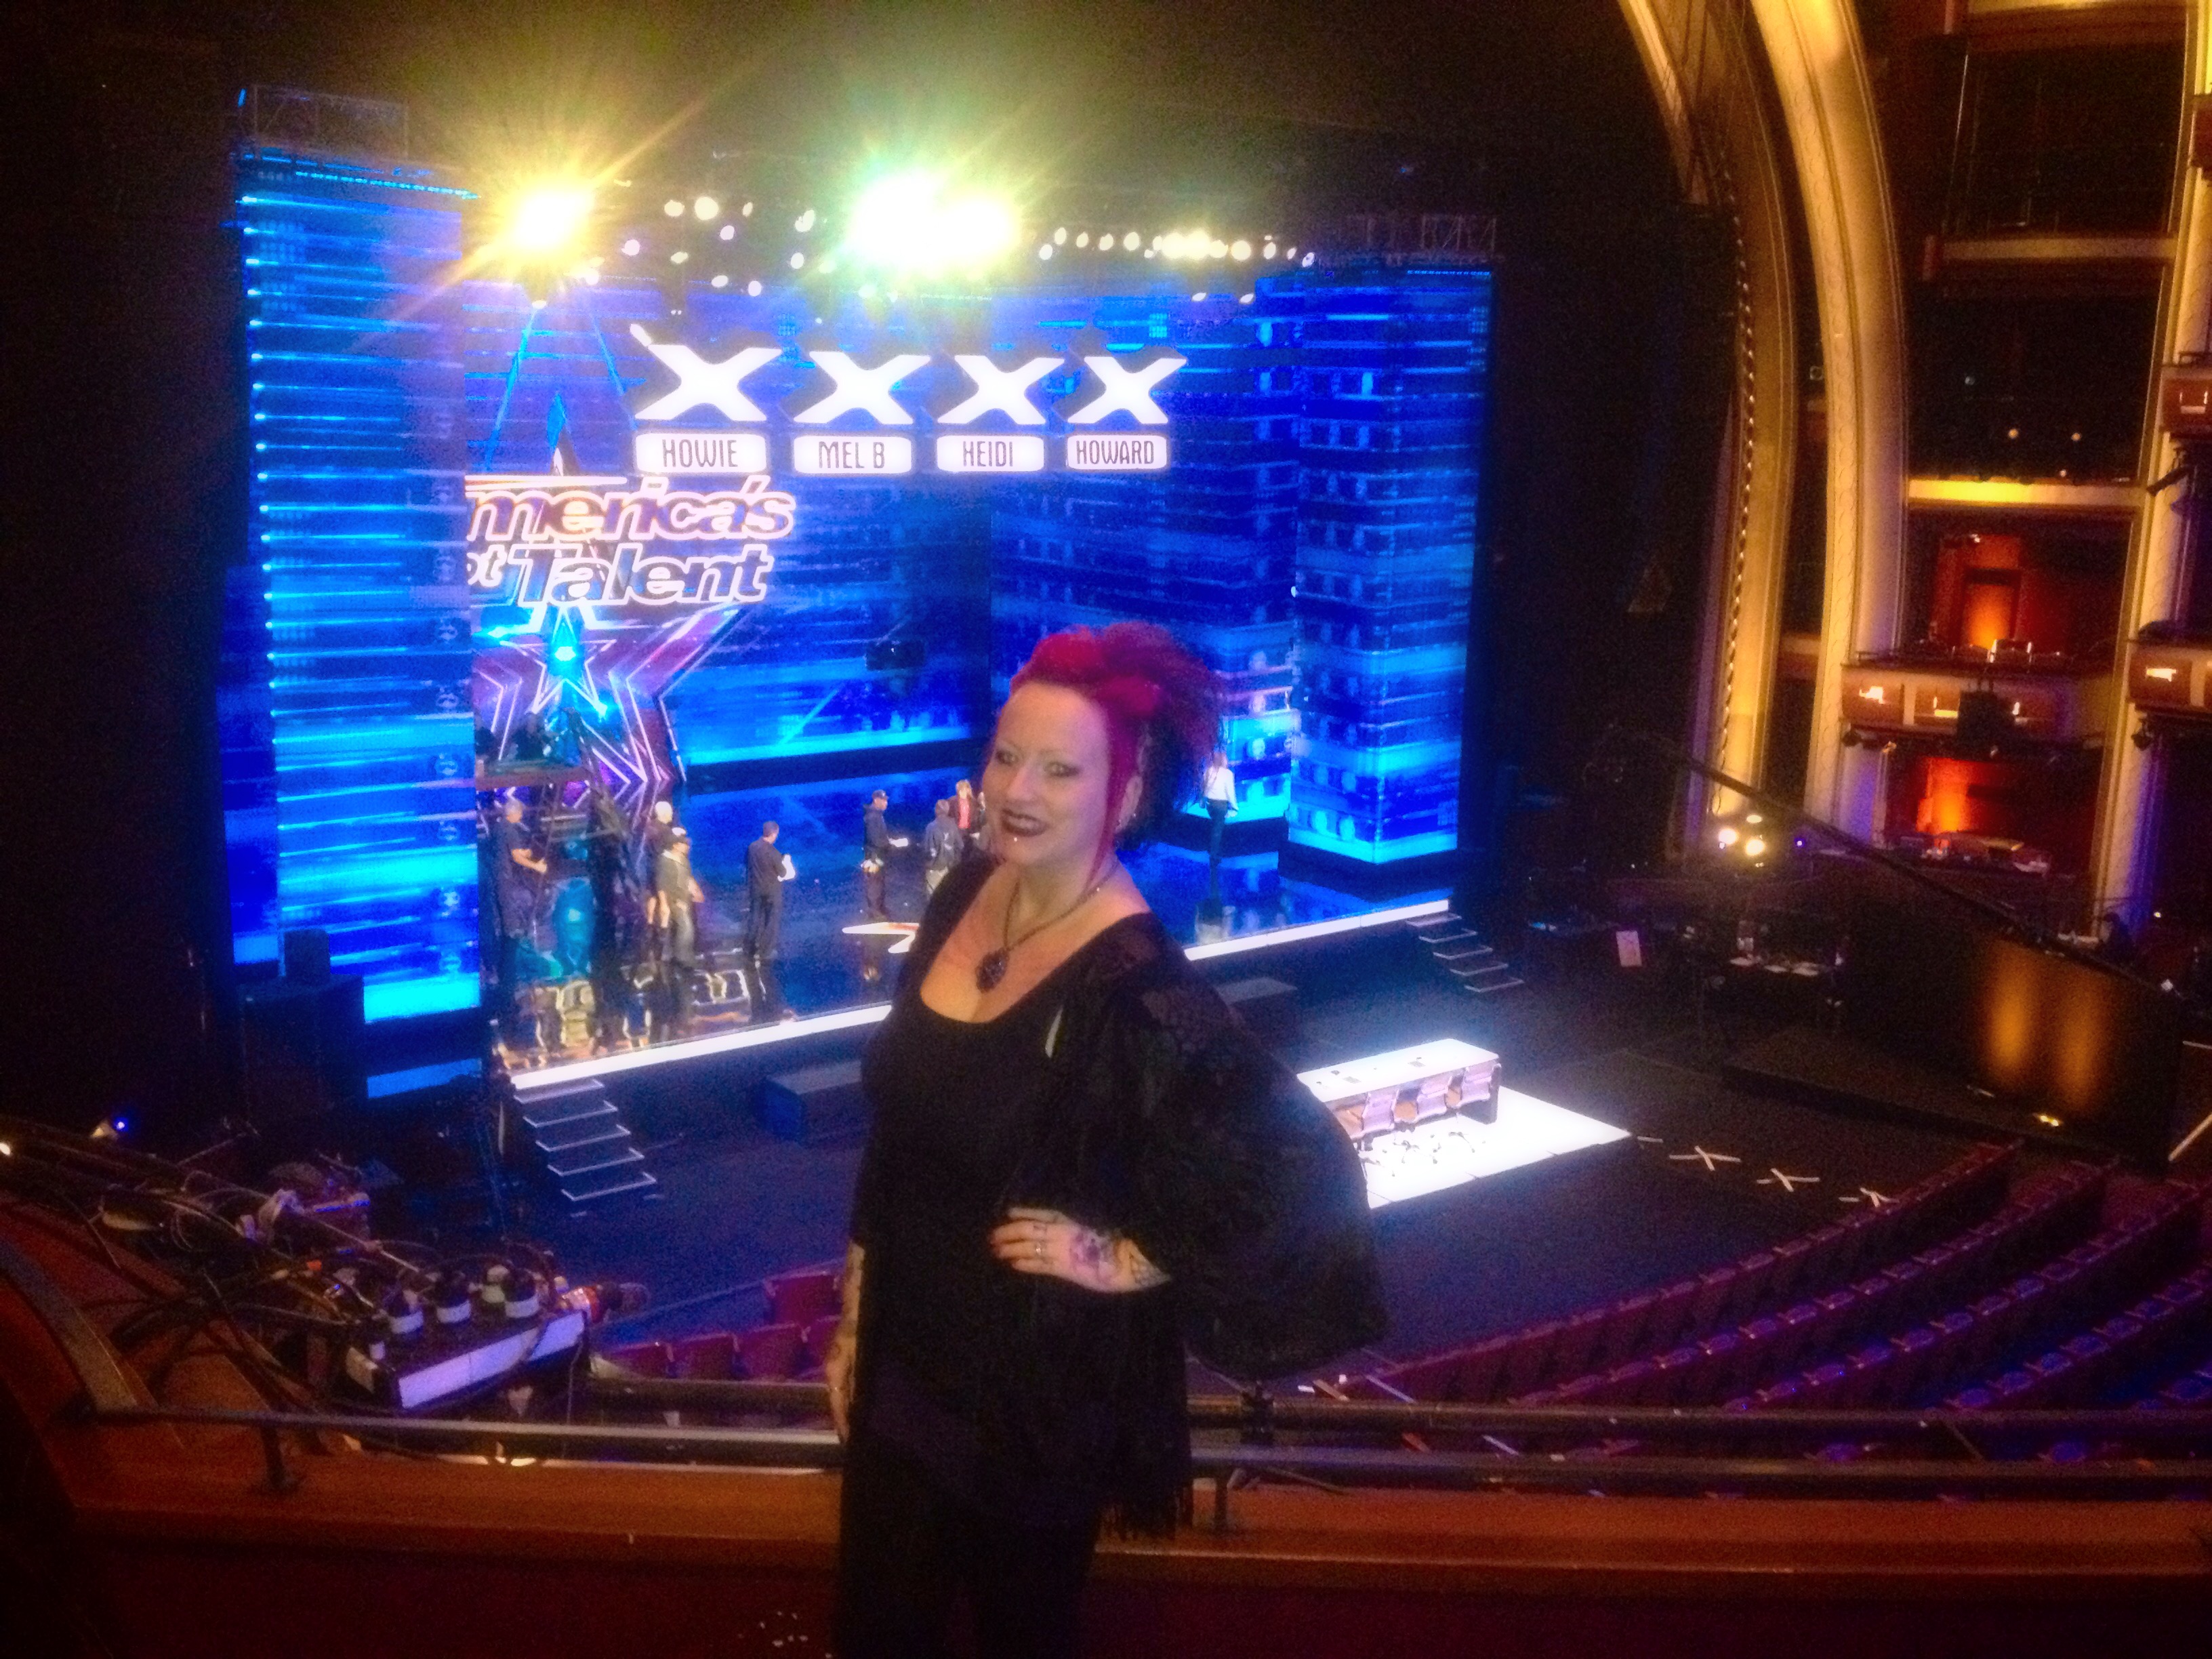 I won the Dolby Theatre's Talent Contest (playing my Uke & singing) and got 4 VIP box seat tickets to the filming of AGT Season 10. Apr. 2015